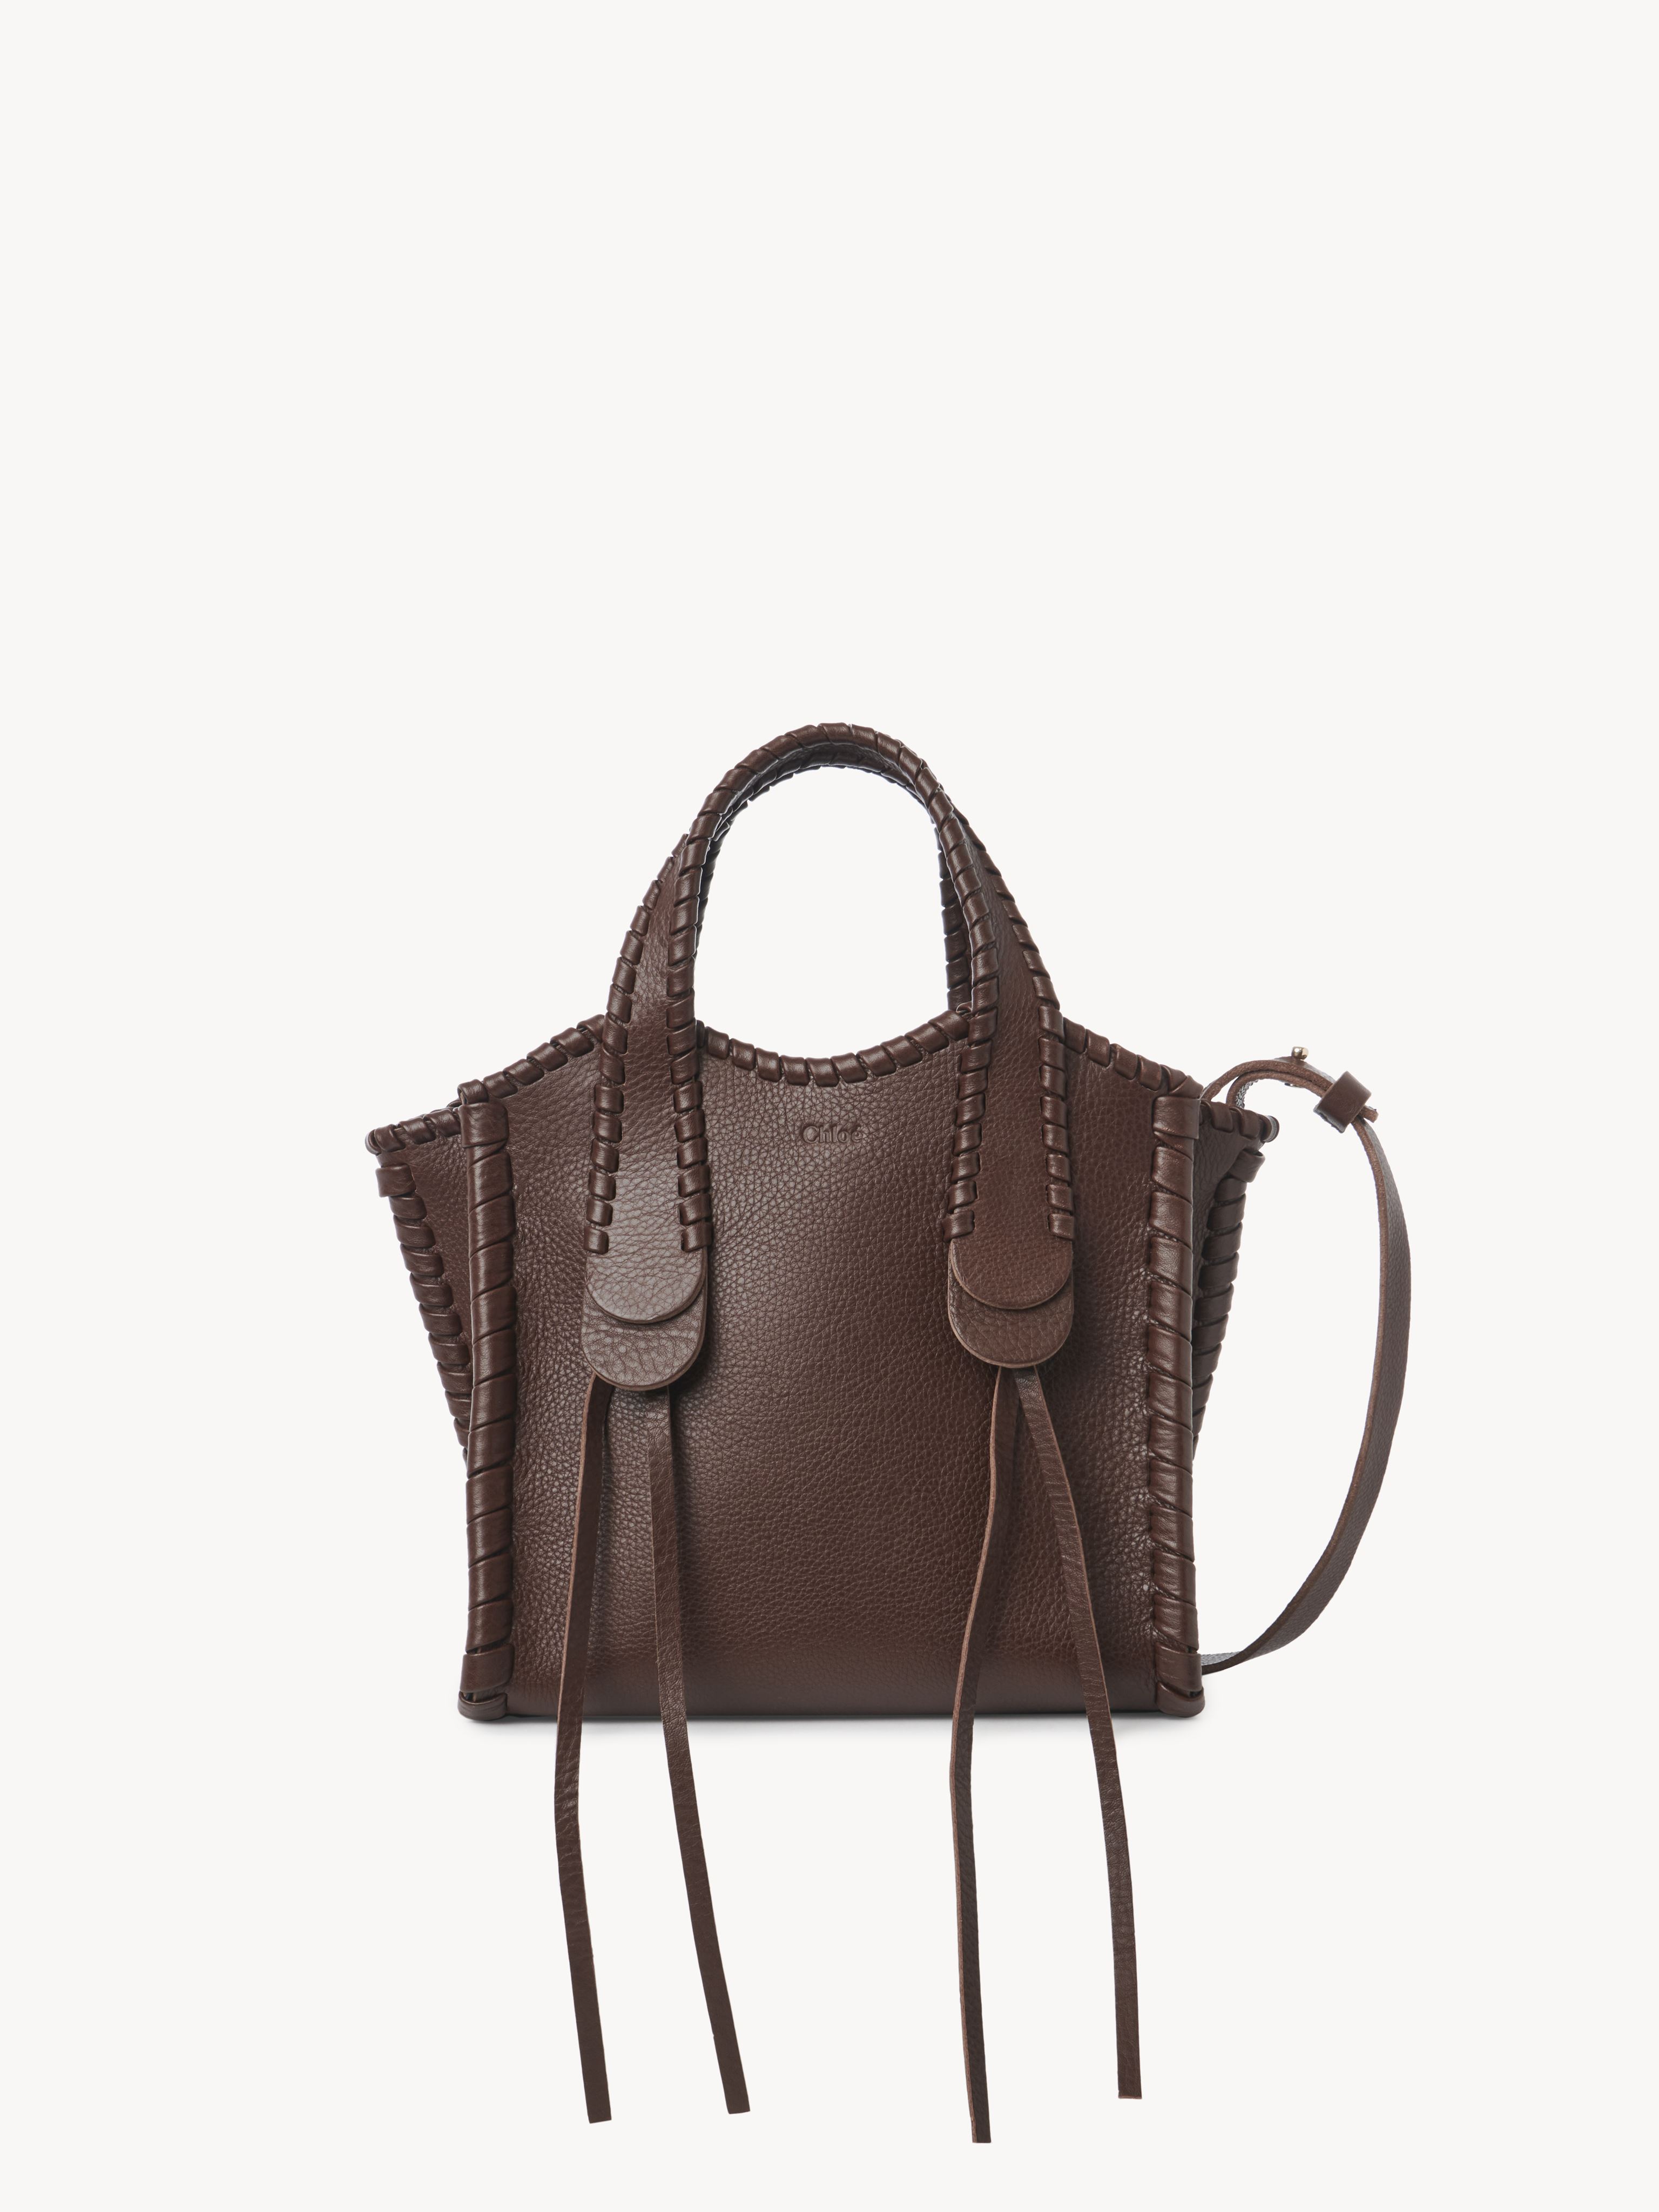 CHLOÉ SMALL MONY TOTE BAG BROWN SIZE ONESIZE 100% CALF-SKIN LEATHER